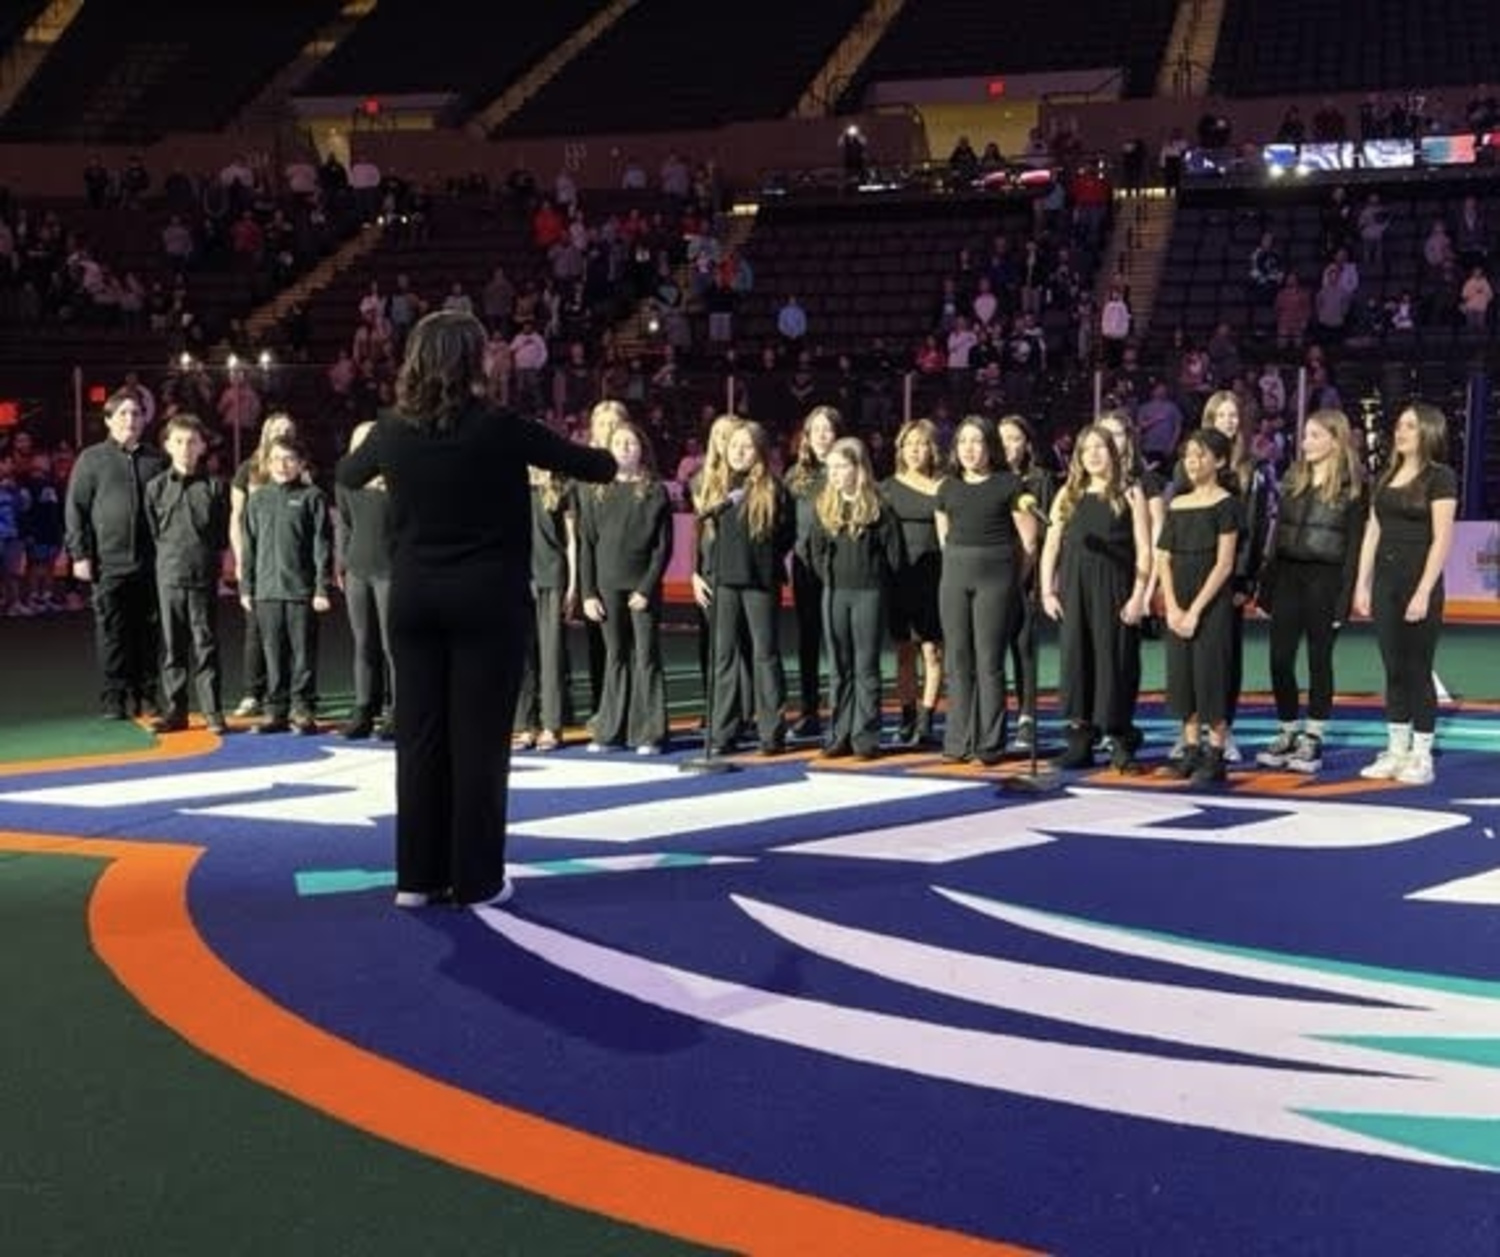 Eastport-South Manor Central School District choral instructor Cara Navaretta and students from Dayton Avenue and Eastport Elementary schools performed the national anthem at the New York Riptide game in Nassau Coliseum. COURTESY EASTPORT-SOUTH MANOR SCHOOL DISTRICT